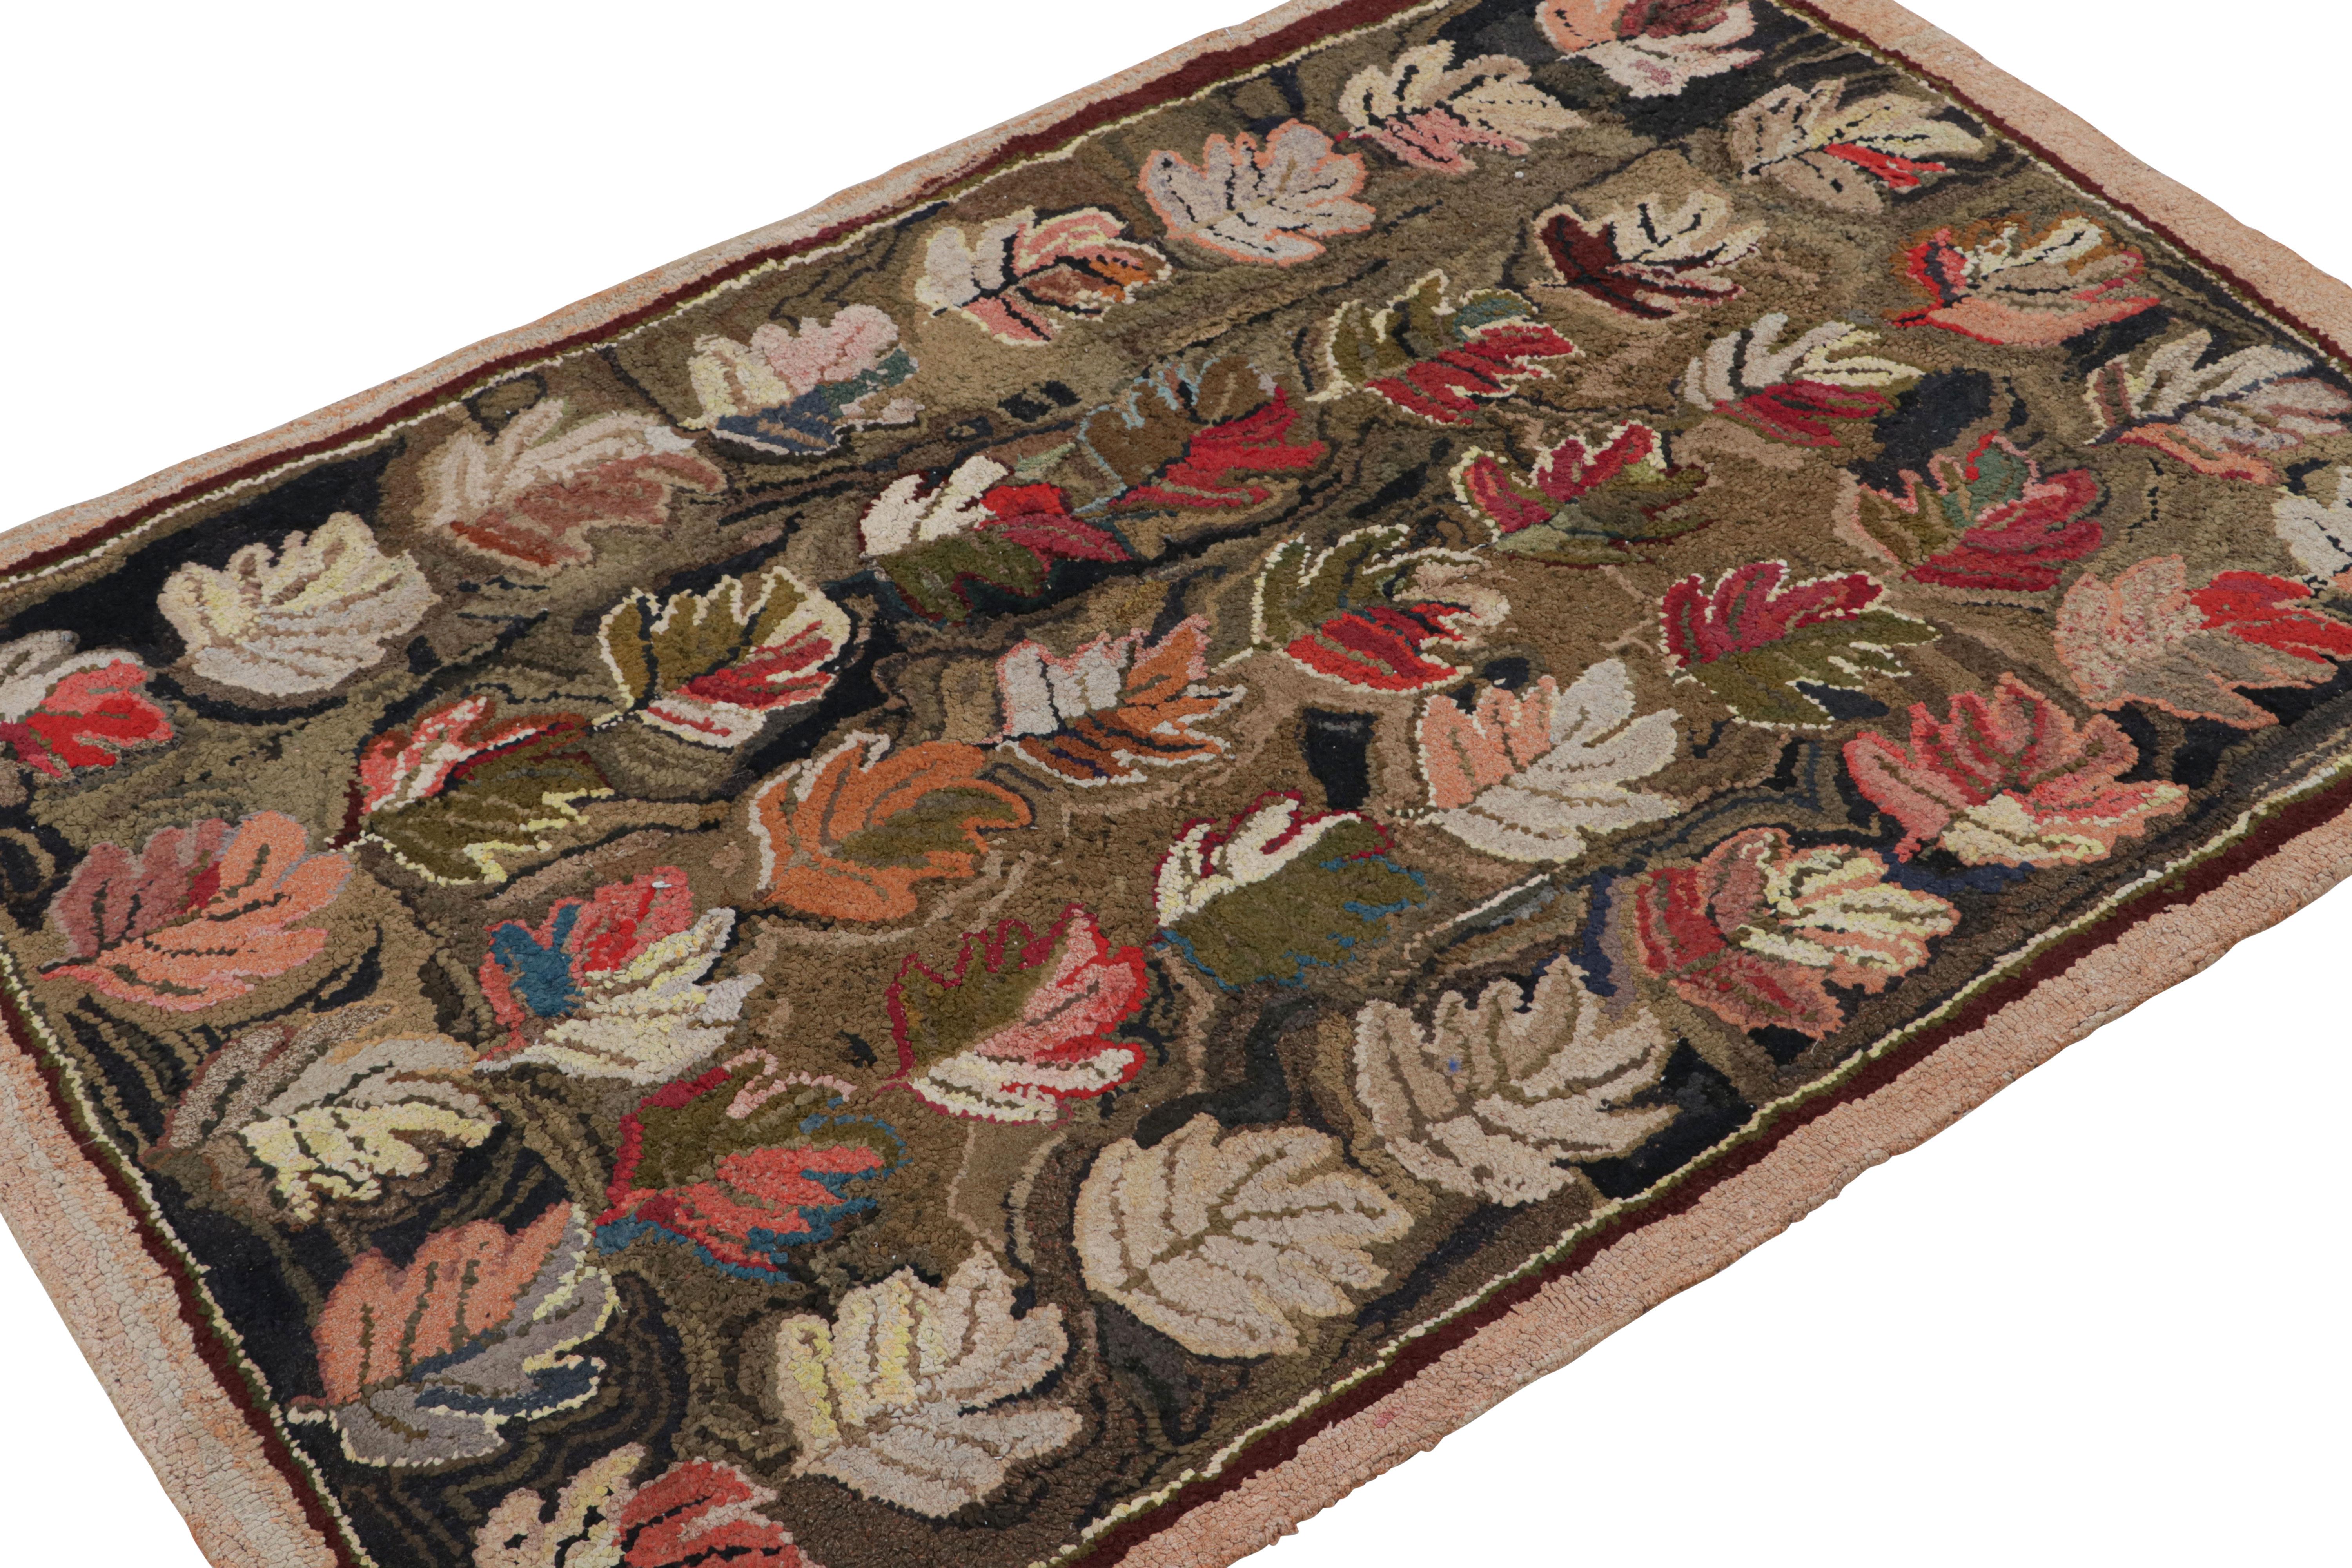 A rare 3x5 antique hooked rug of United States provenance, handmade in wool and fabric circa 1920 with floral patterns of leaves over green and brown tones.  

On the Design: 

Keen eyes will note particular chartreuse color in the undertones—a